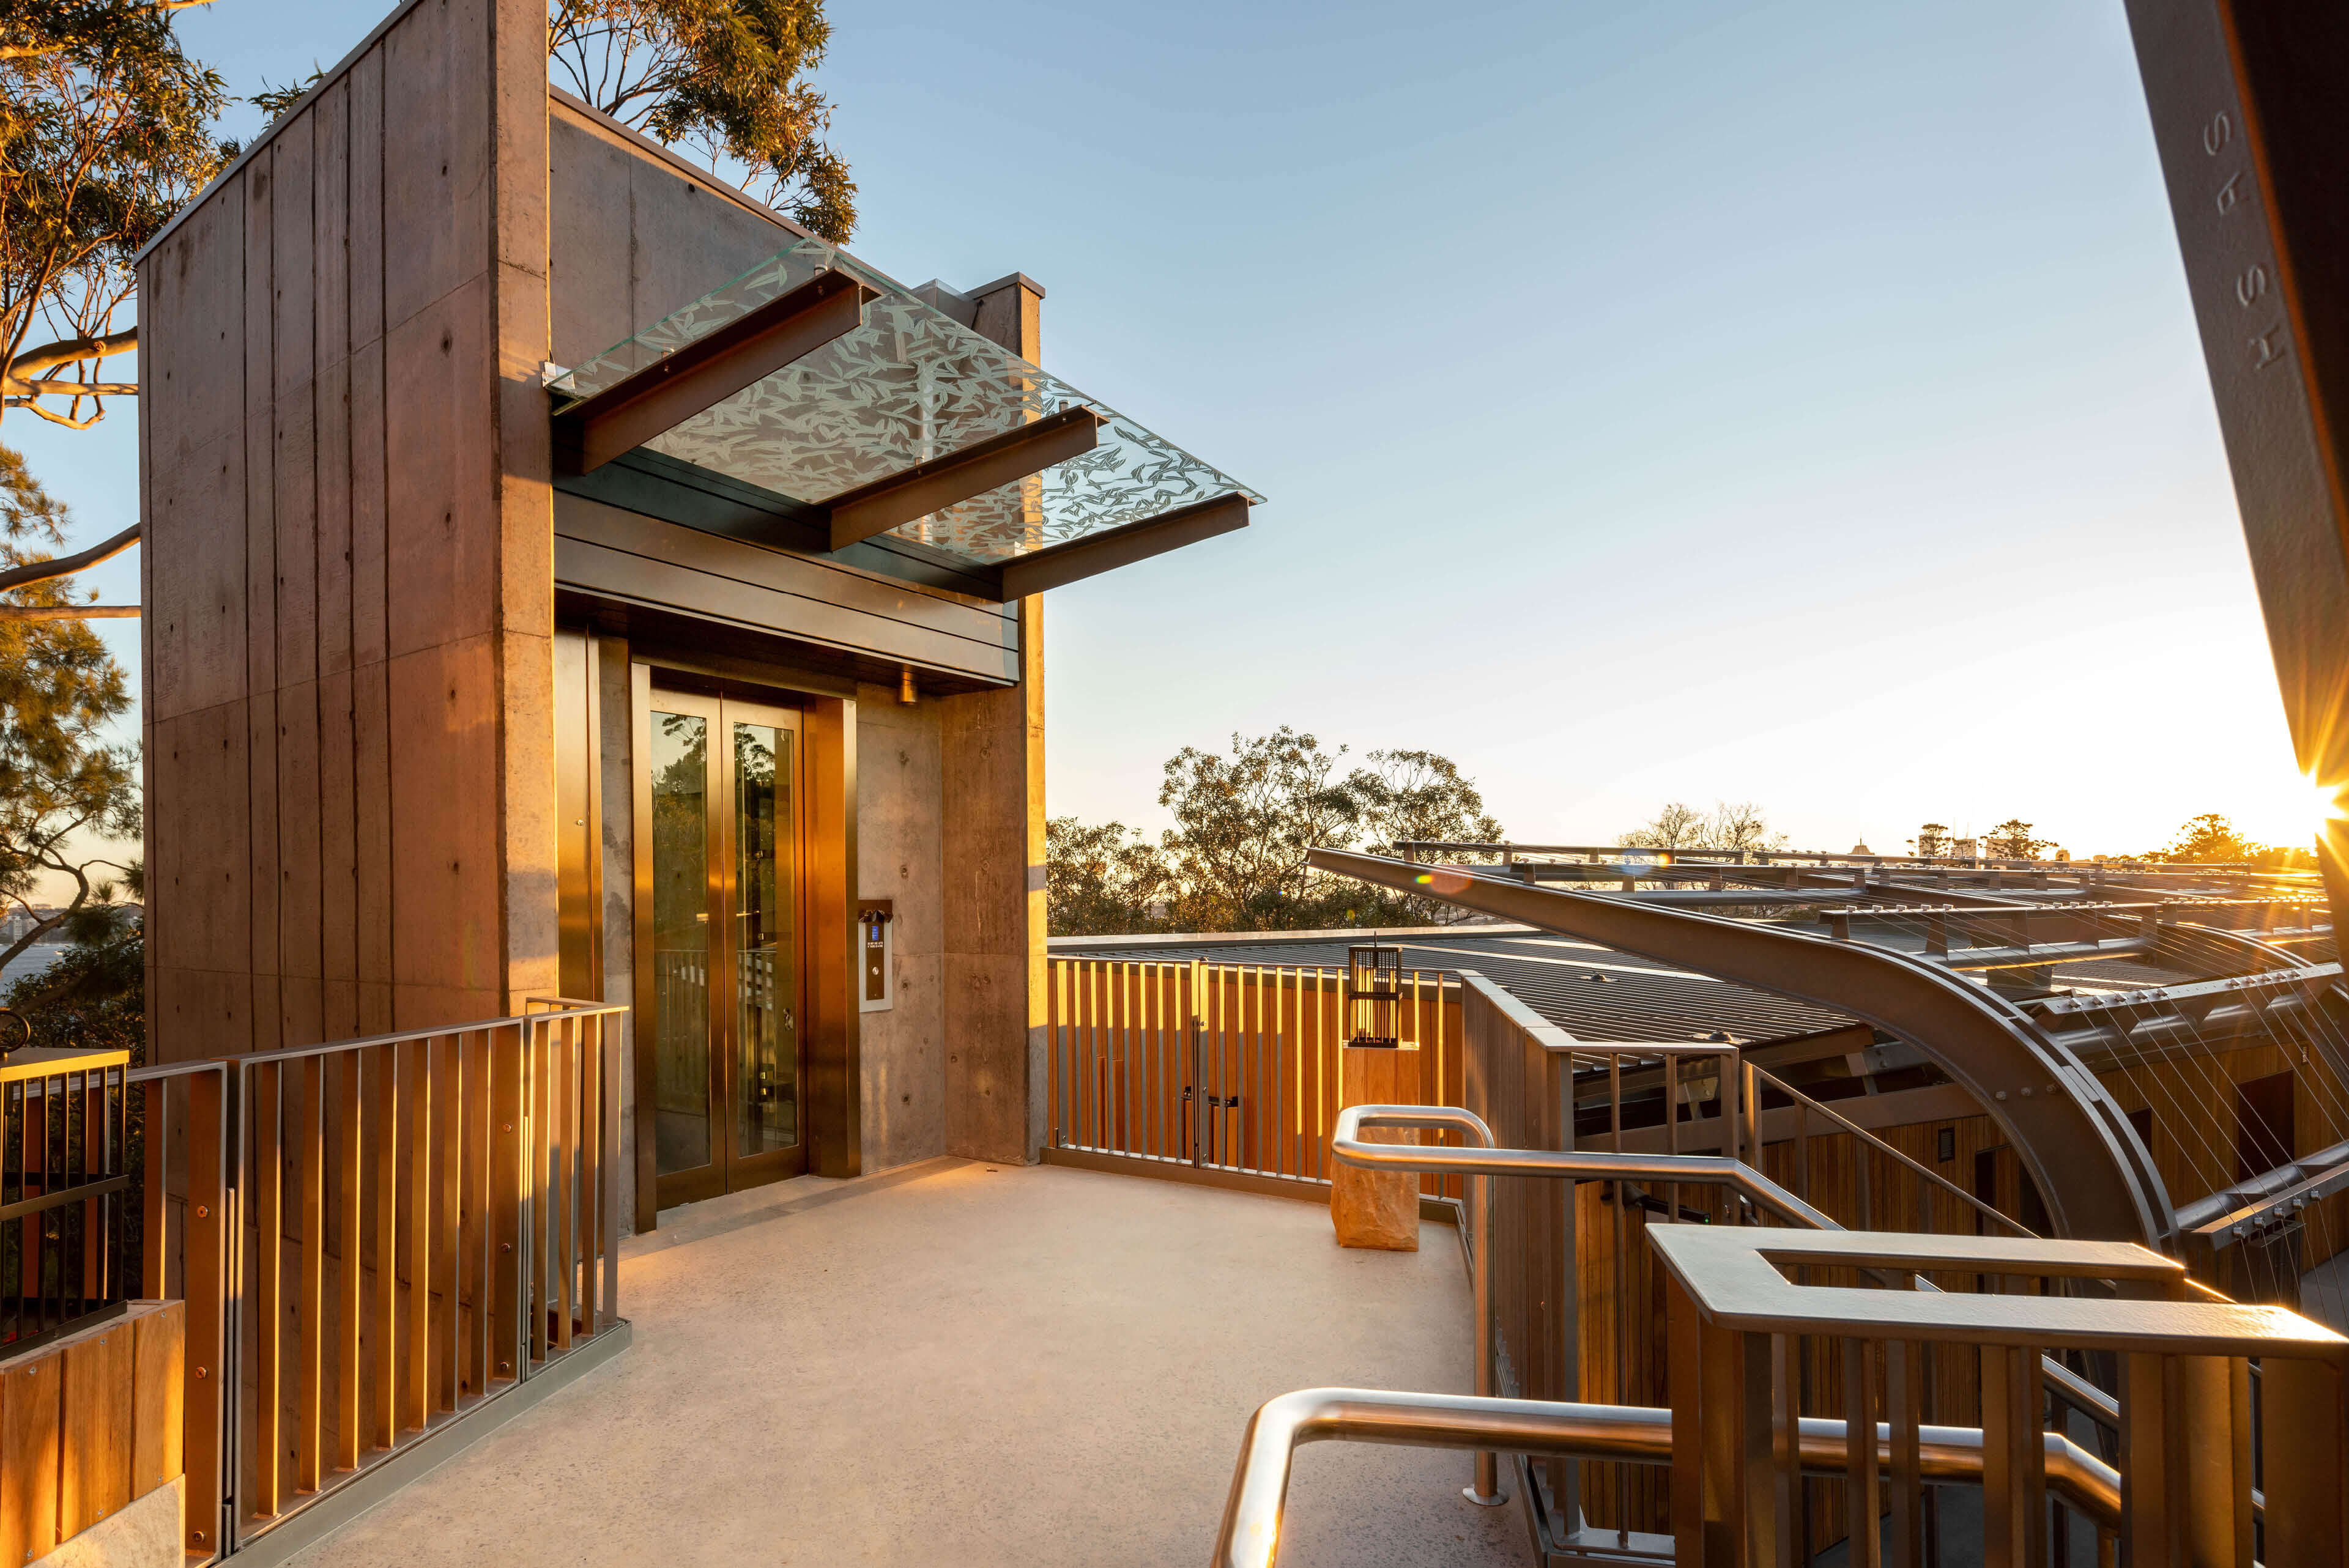 13 sun setting on lift feature and connecting pathways to accomodation at taronga wildlife retreat sydney taylor construction hospitality